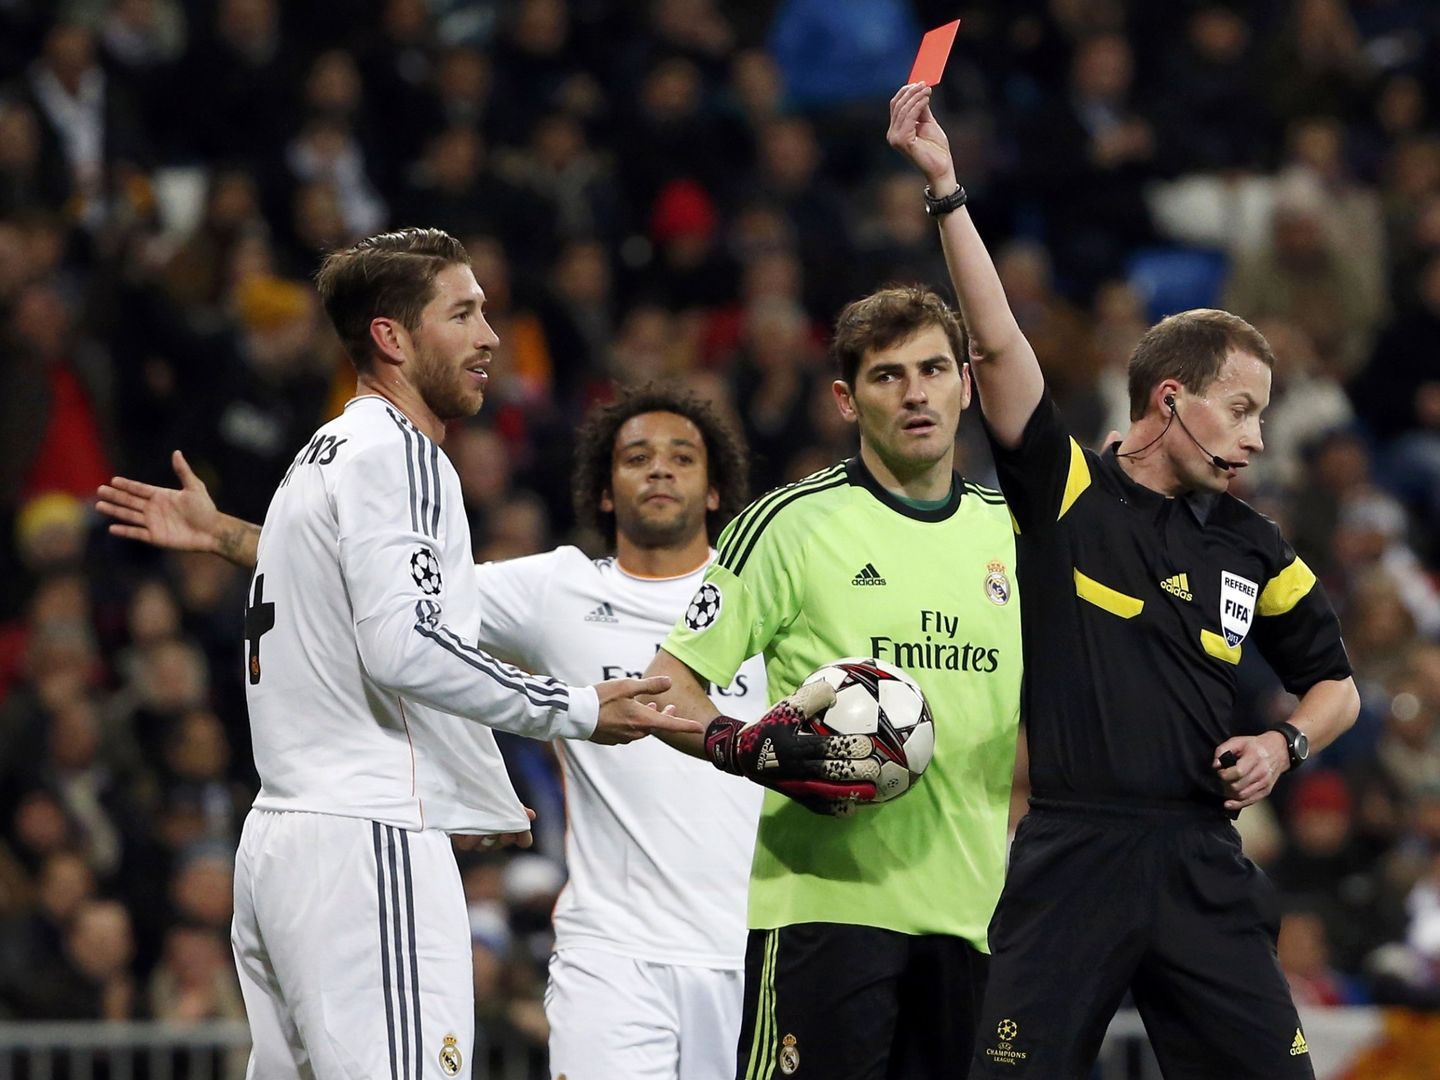 Referee collum shows a red card to real madrid's ramos during their champions league soccer match in madrid